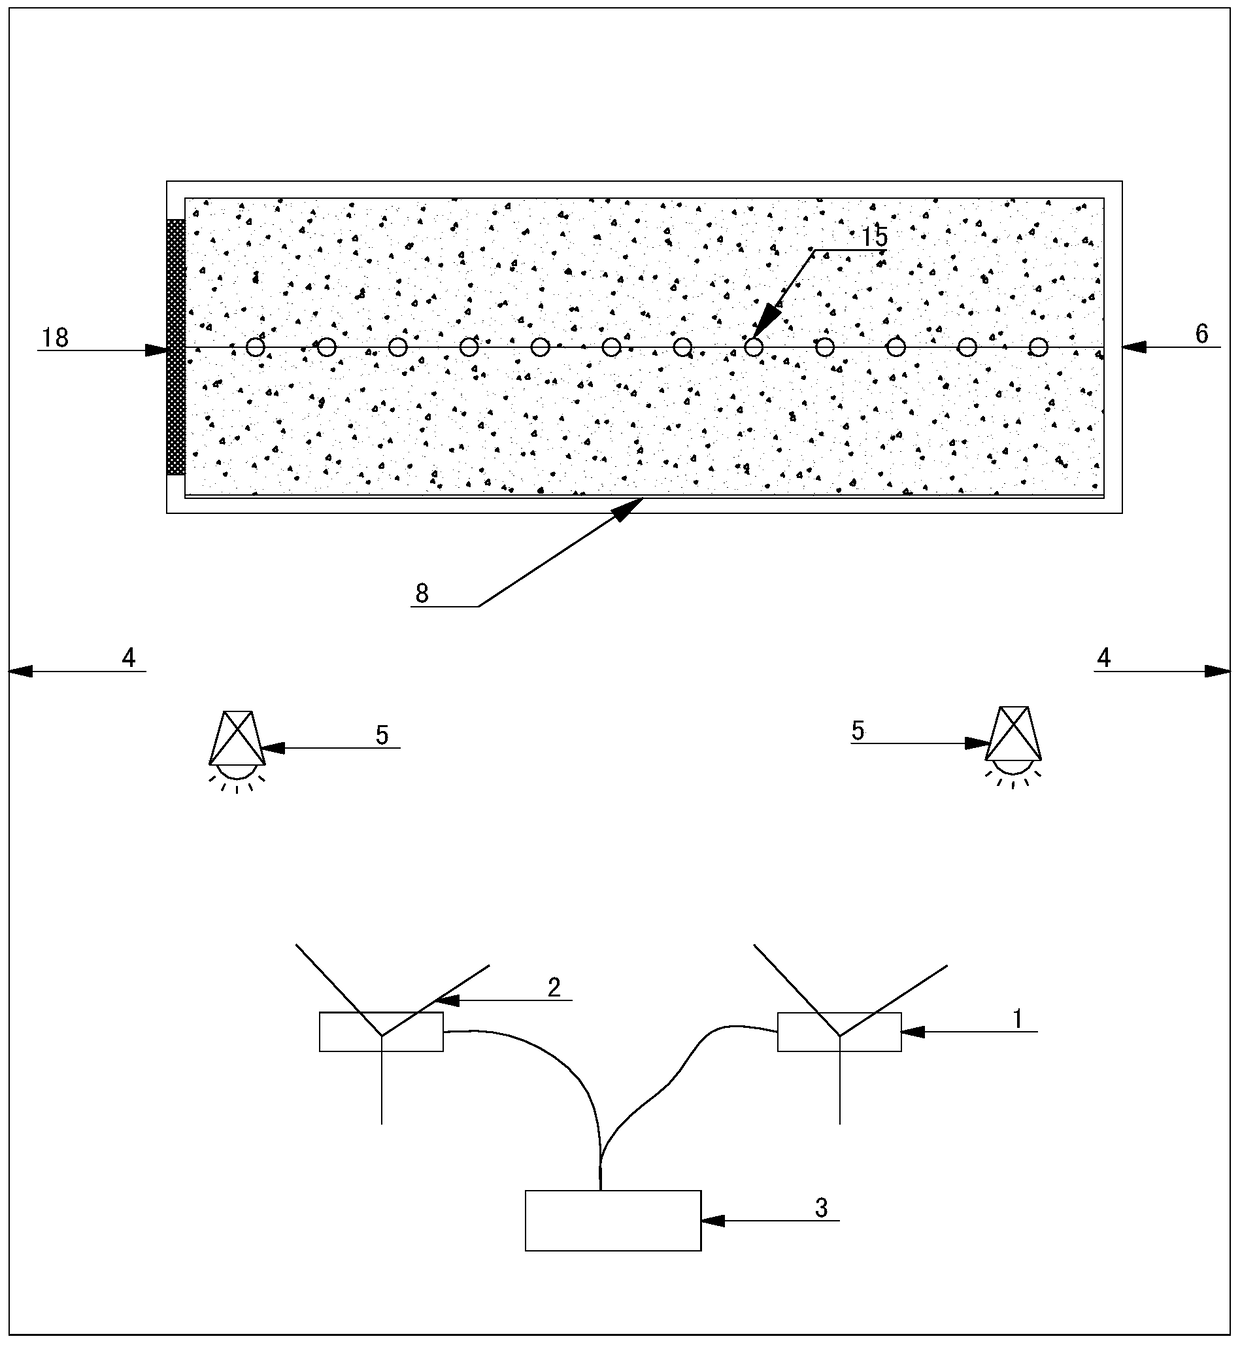 A test device and method for simulating stratum loss caused by stratum voids in subway shield tunnels